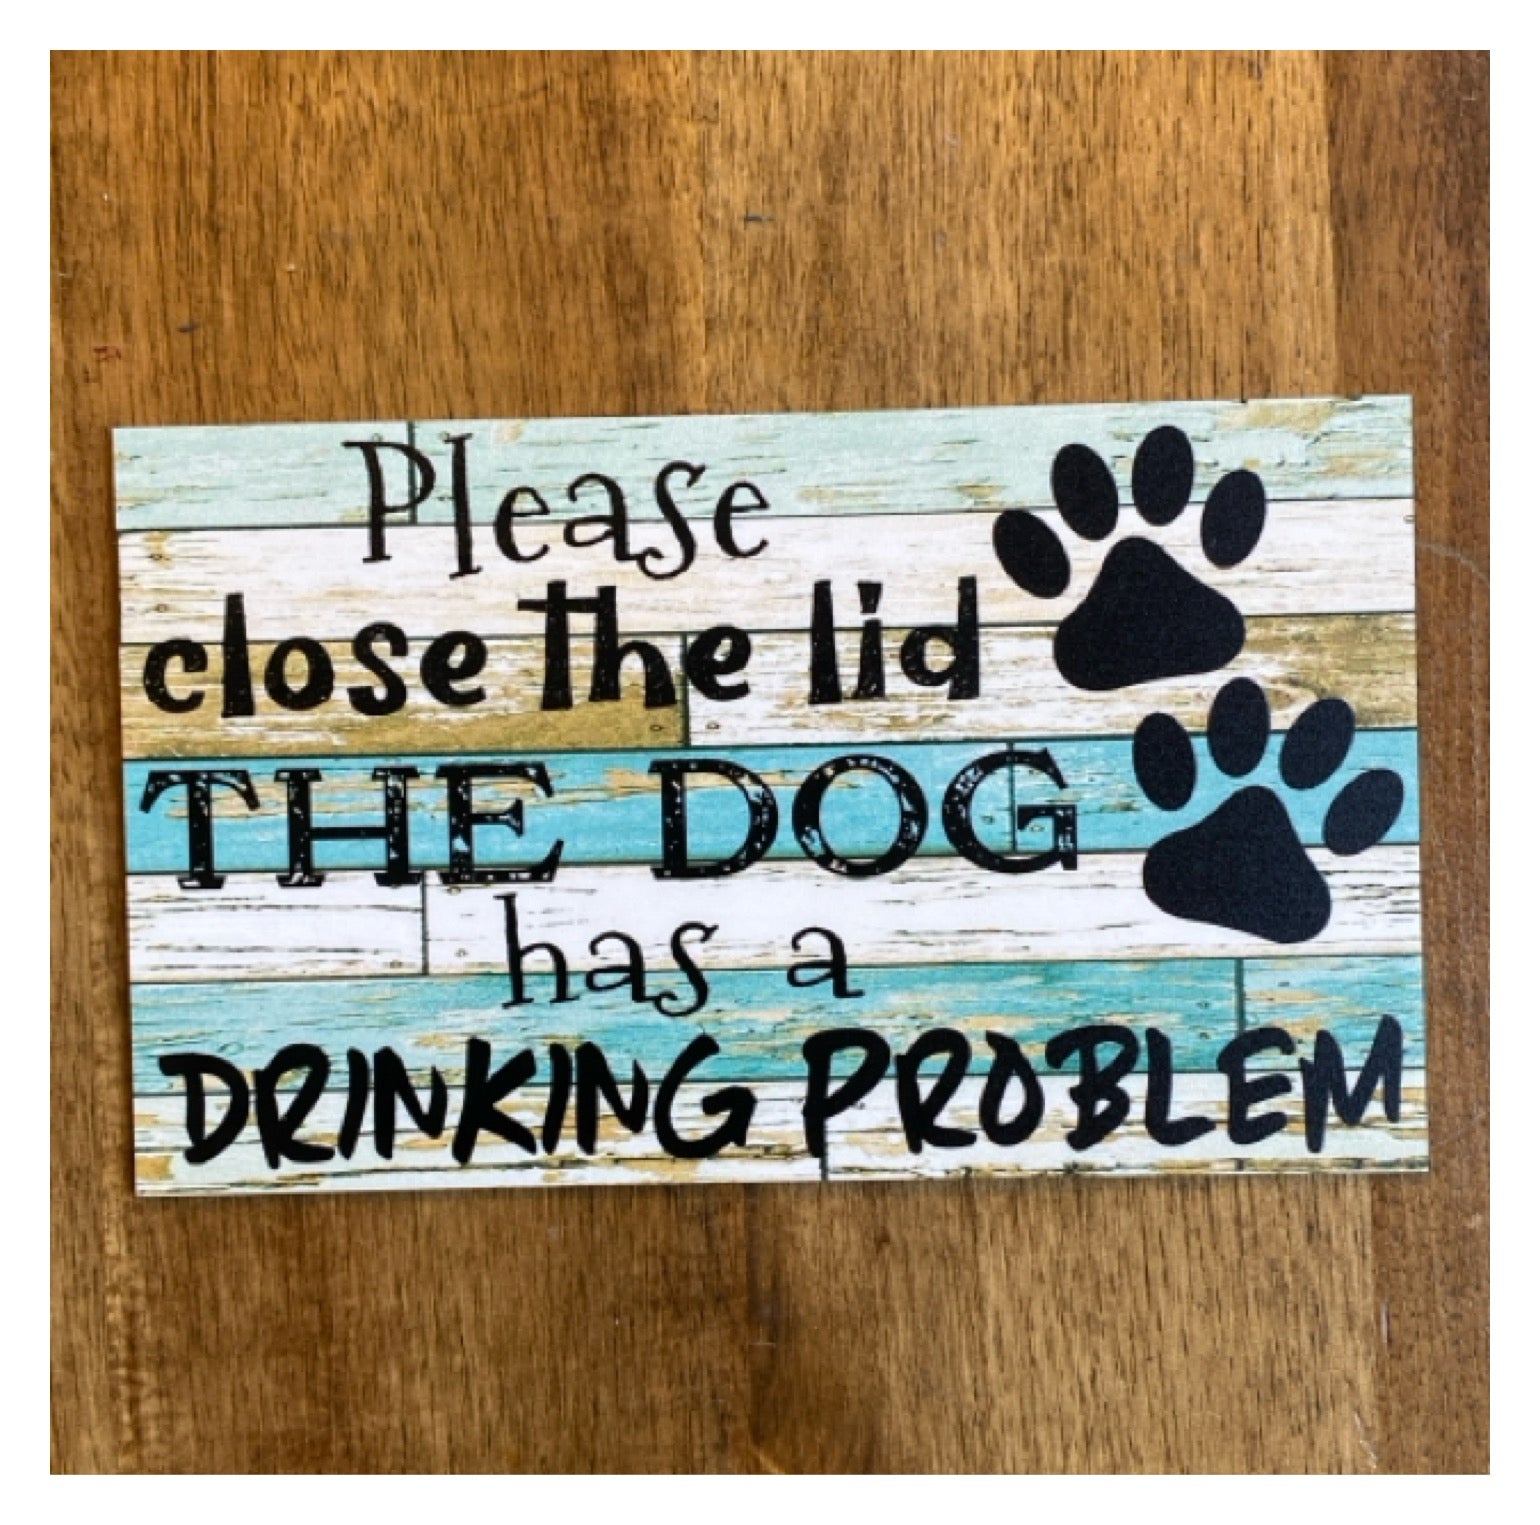 Toilet Close Lid Dog Has Drinking Problem Sign - The Renmy Store Homewares & Gifts 